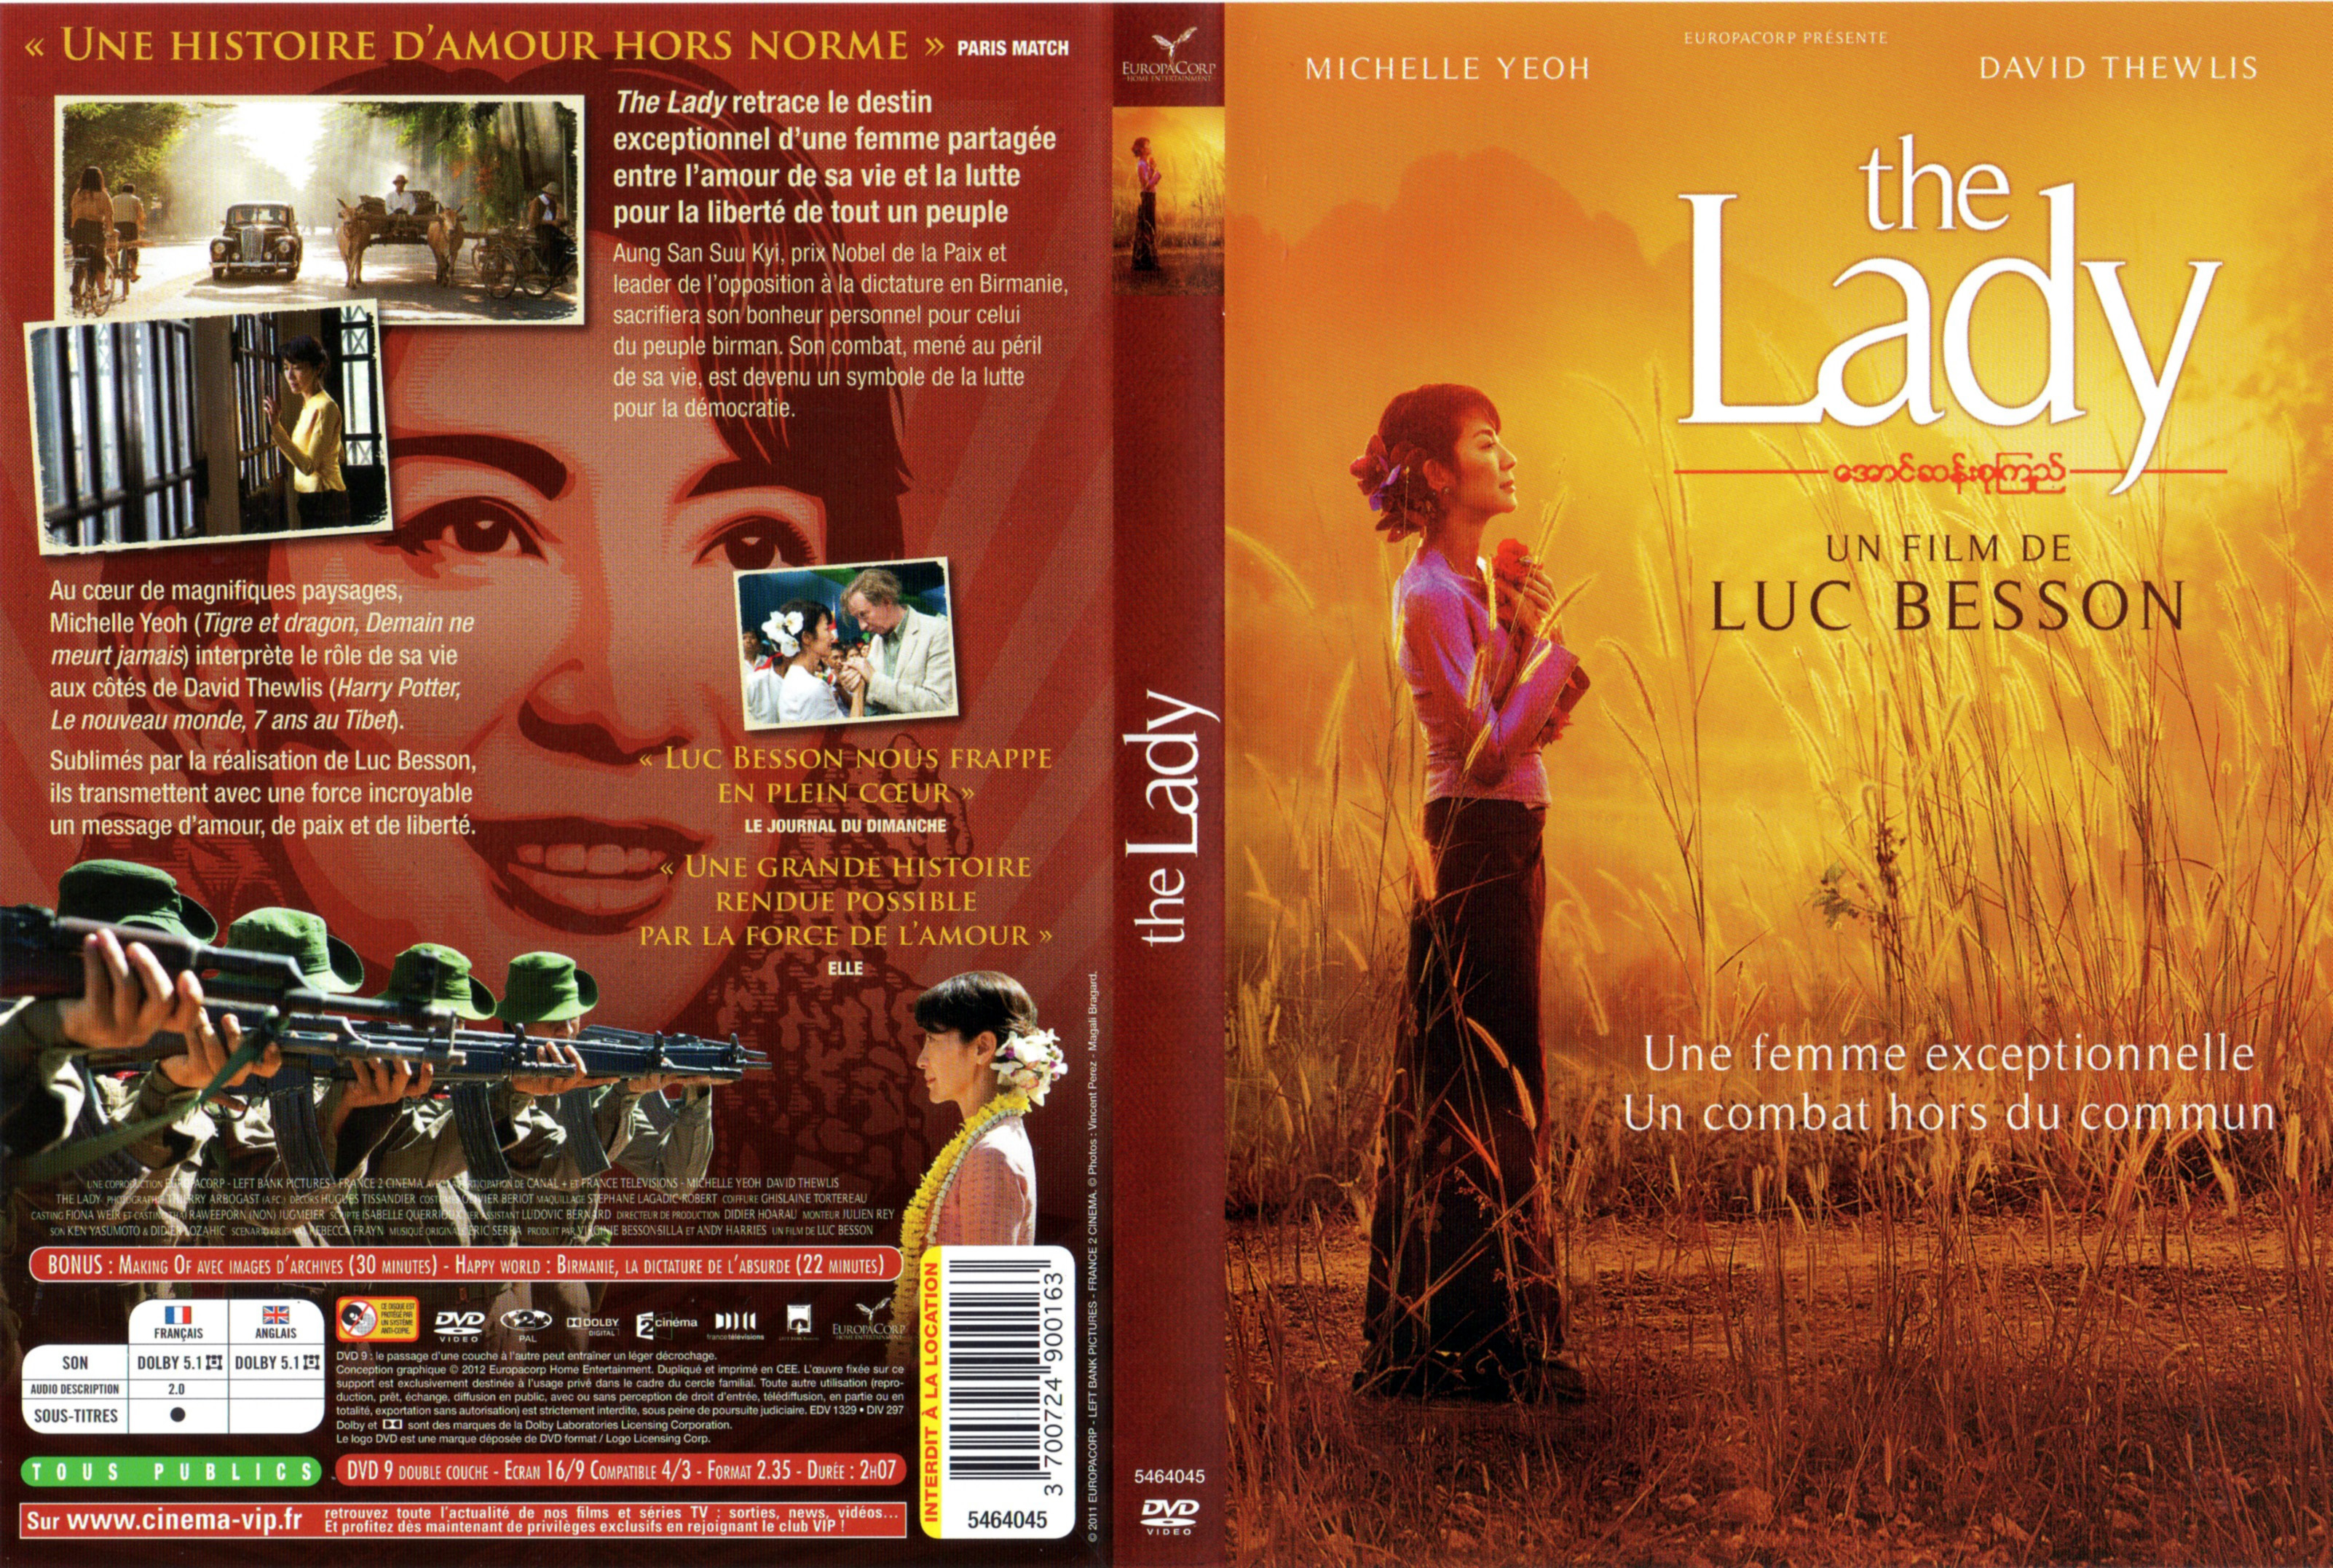 Jaquette DVD The Lady